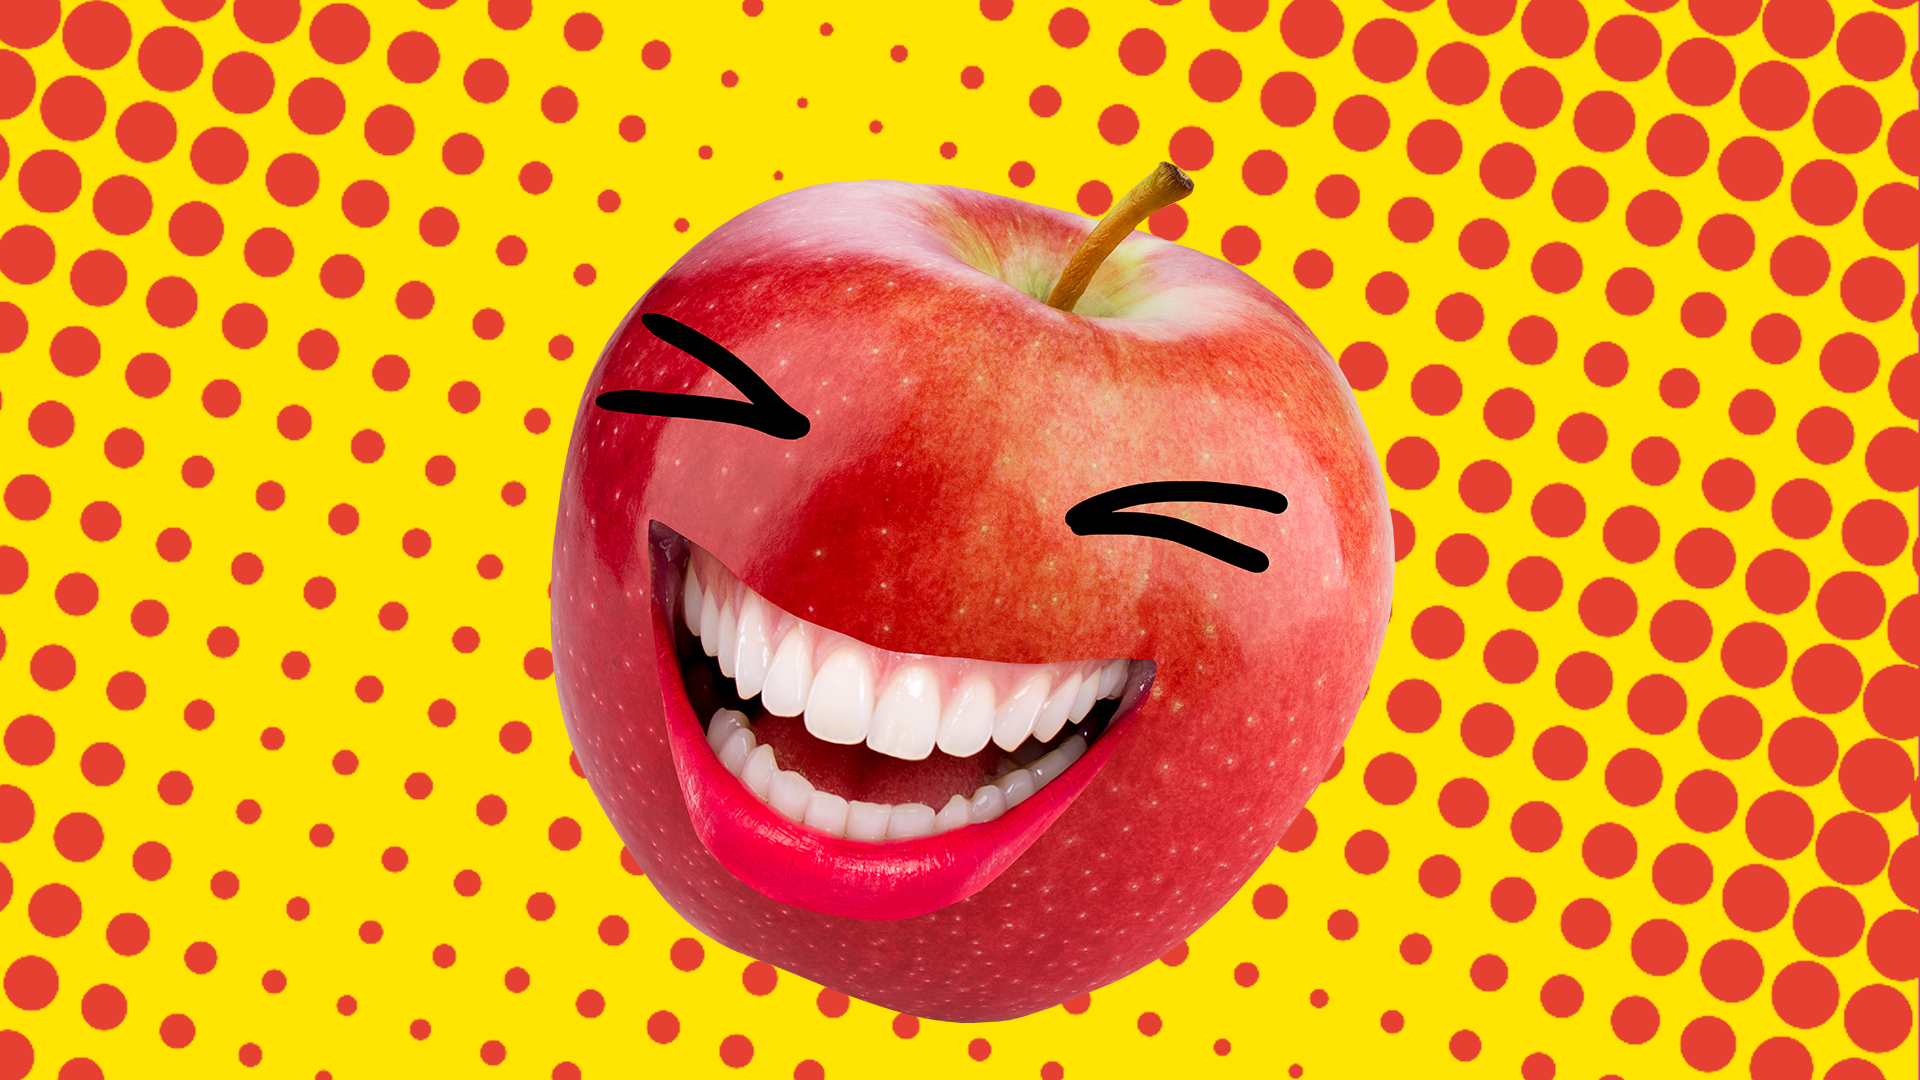 Apple laughing on red and yellow background